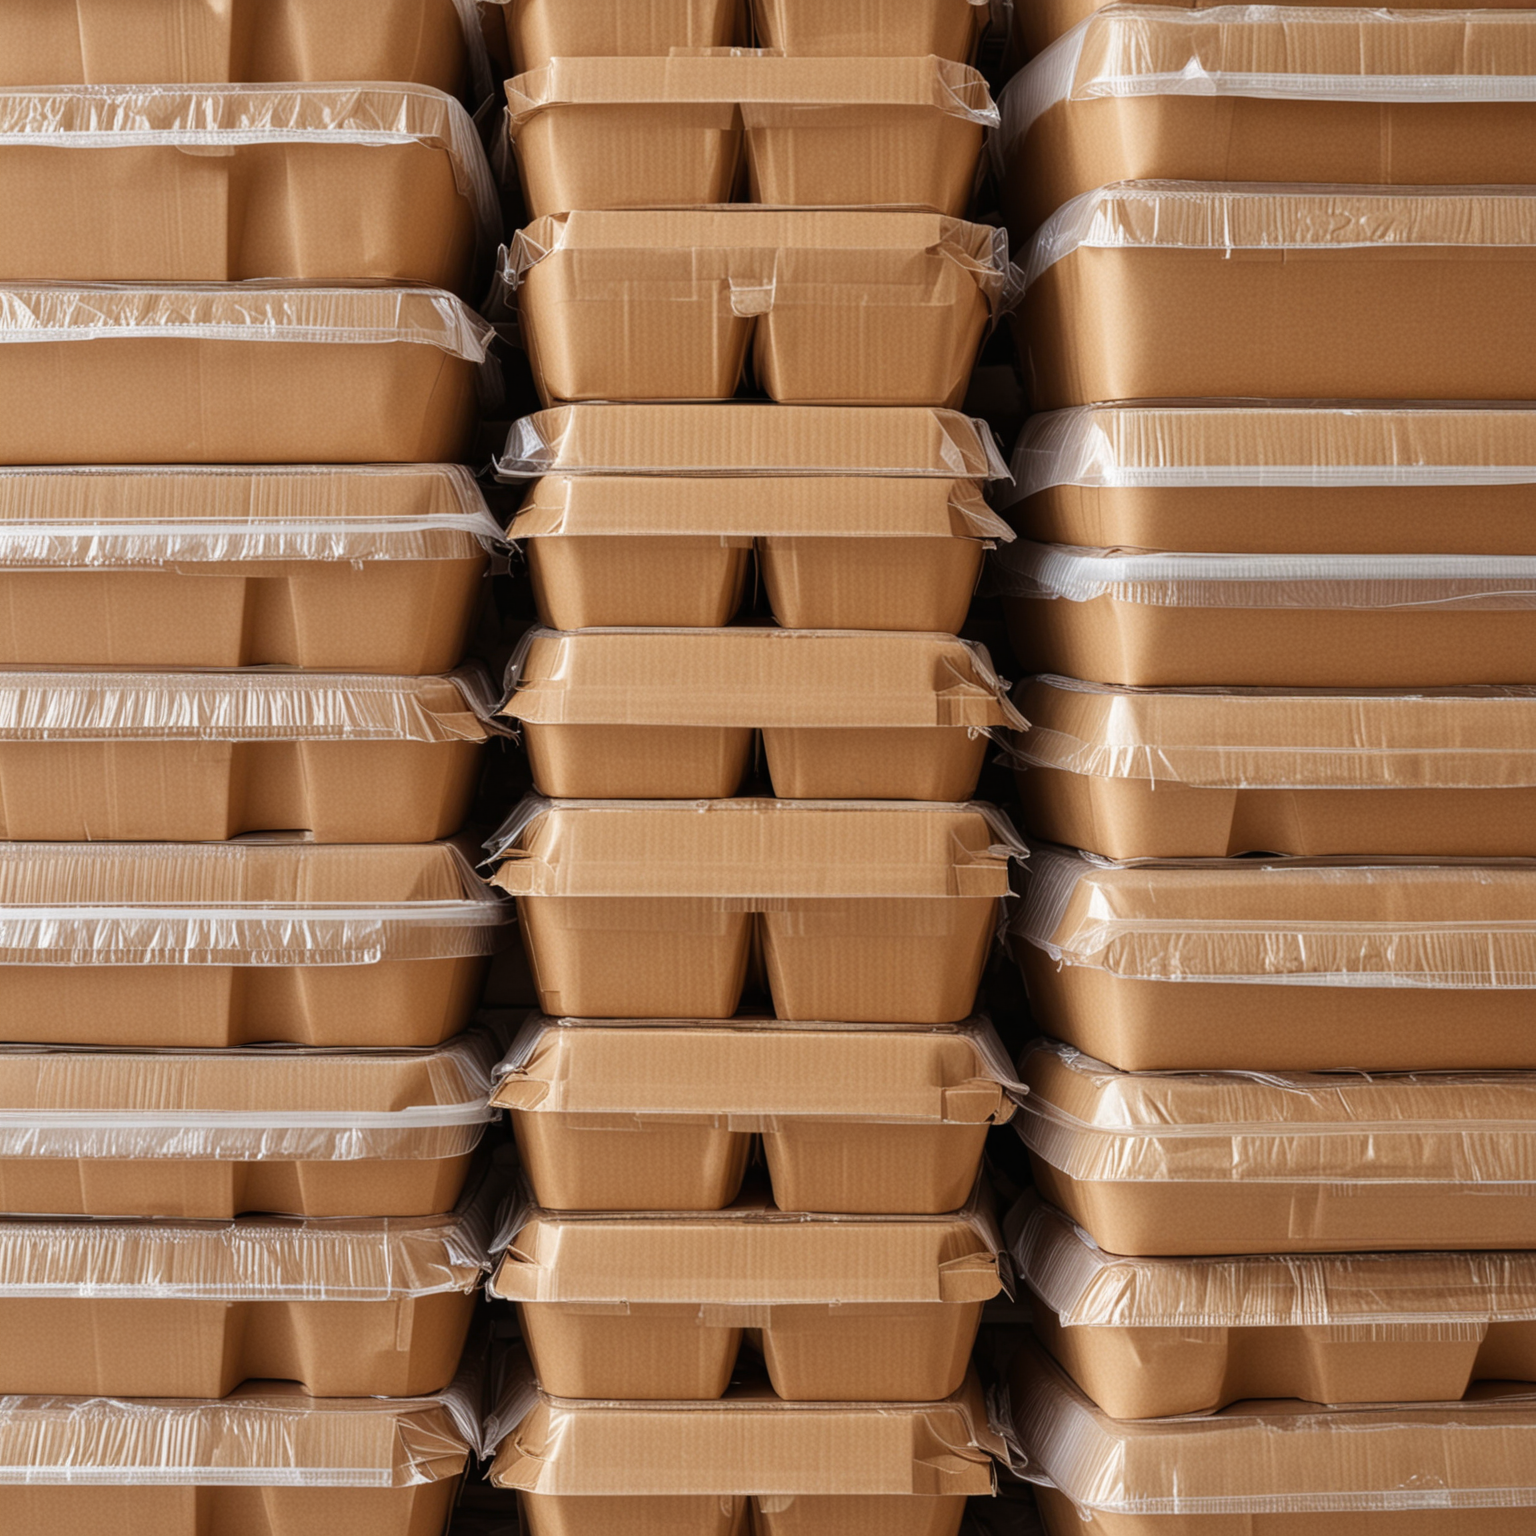 Stacked Food Packaging in a Warehouse Setting